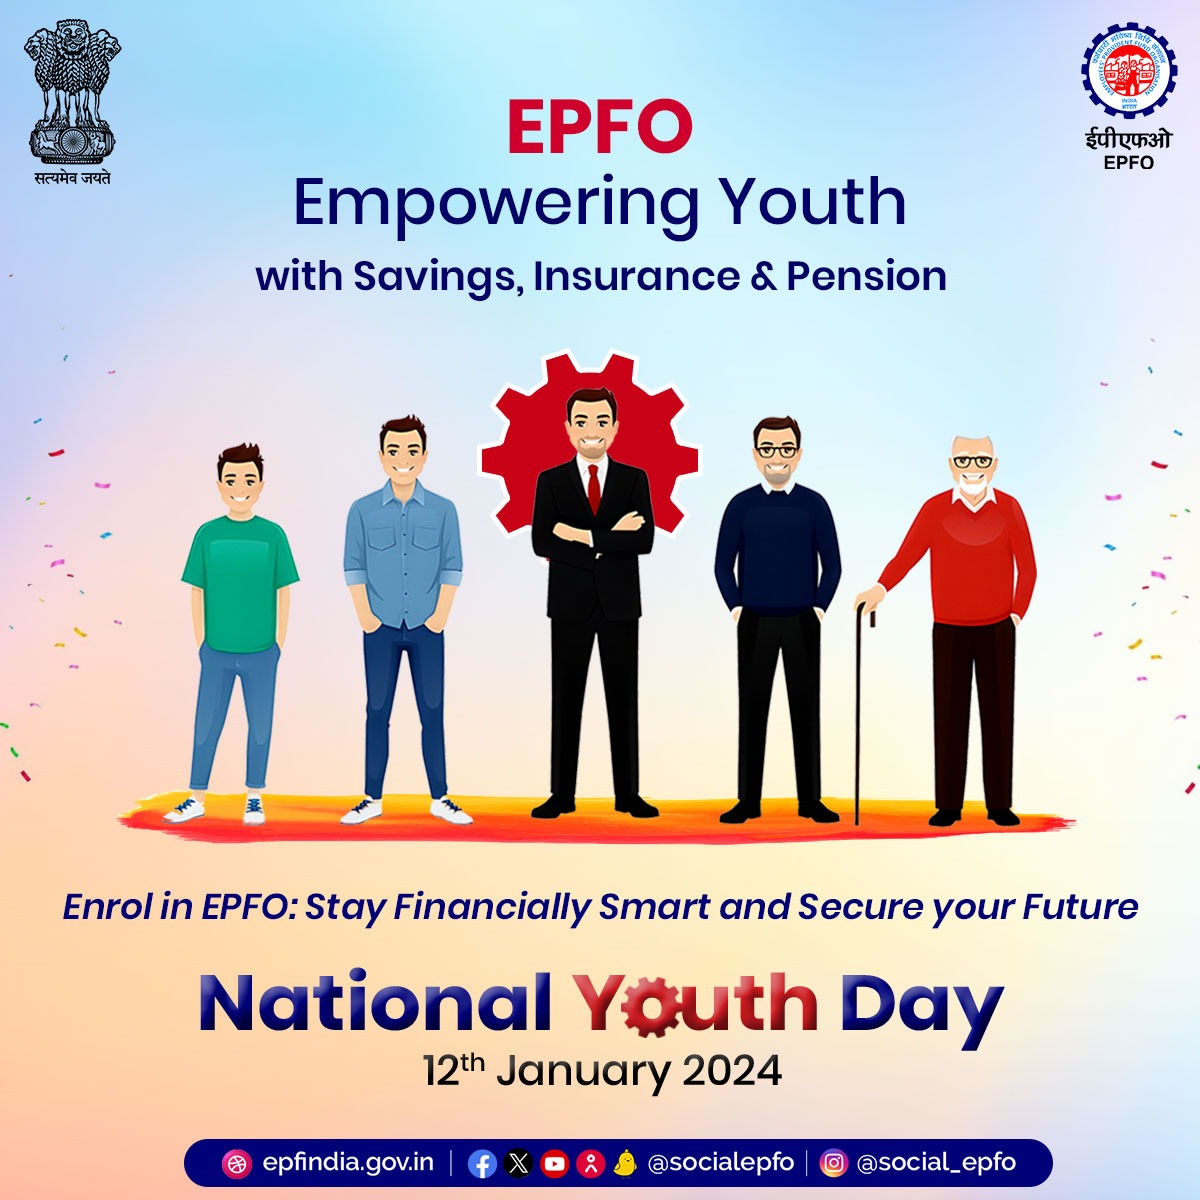 Happy Youth Day! 
EPFO salutes the dynamic and ambitious youth of today and offers them various schemes for financial security and stability.
Be a part of EPFO and enjoy financial stability and security for your future. 

#NationalYouthDay #EPFO #EPFOForFuture #YouthDay2024